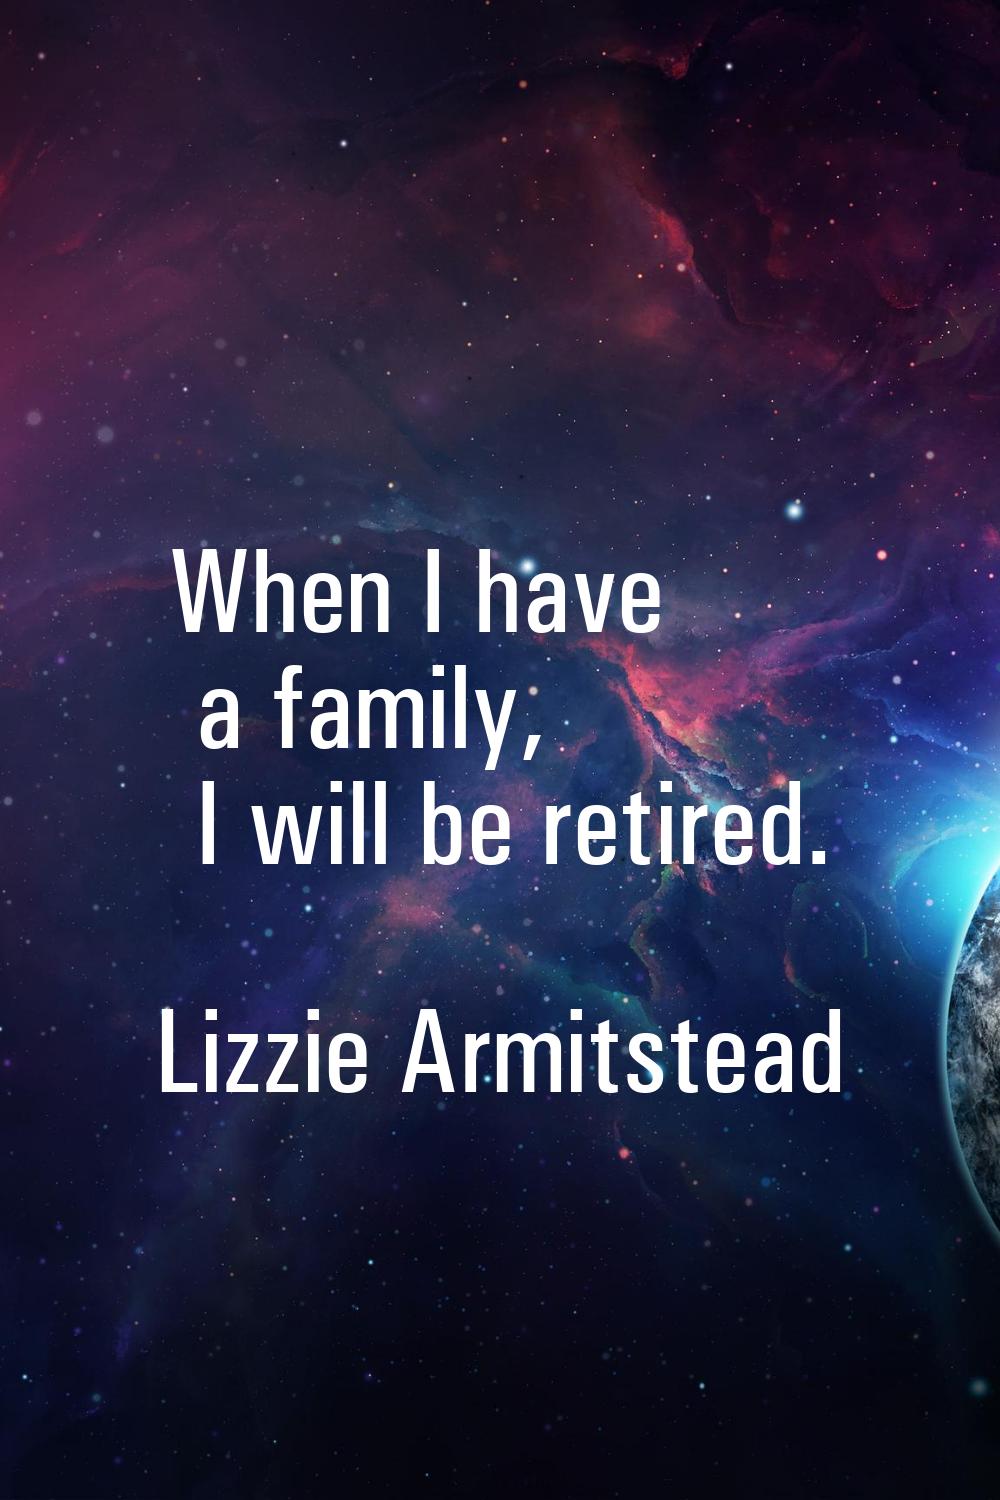 When I have a family, I will be retired.